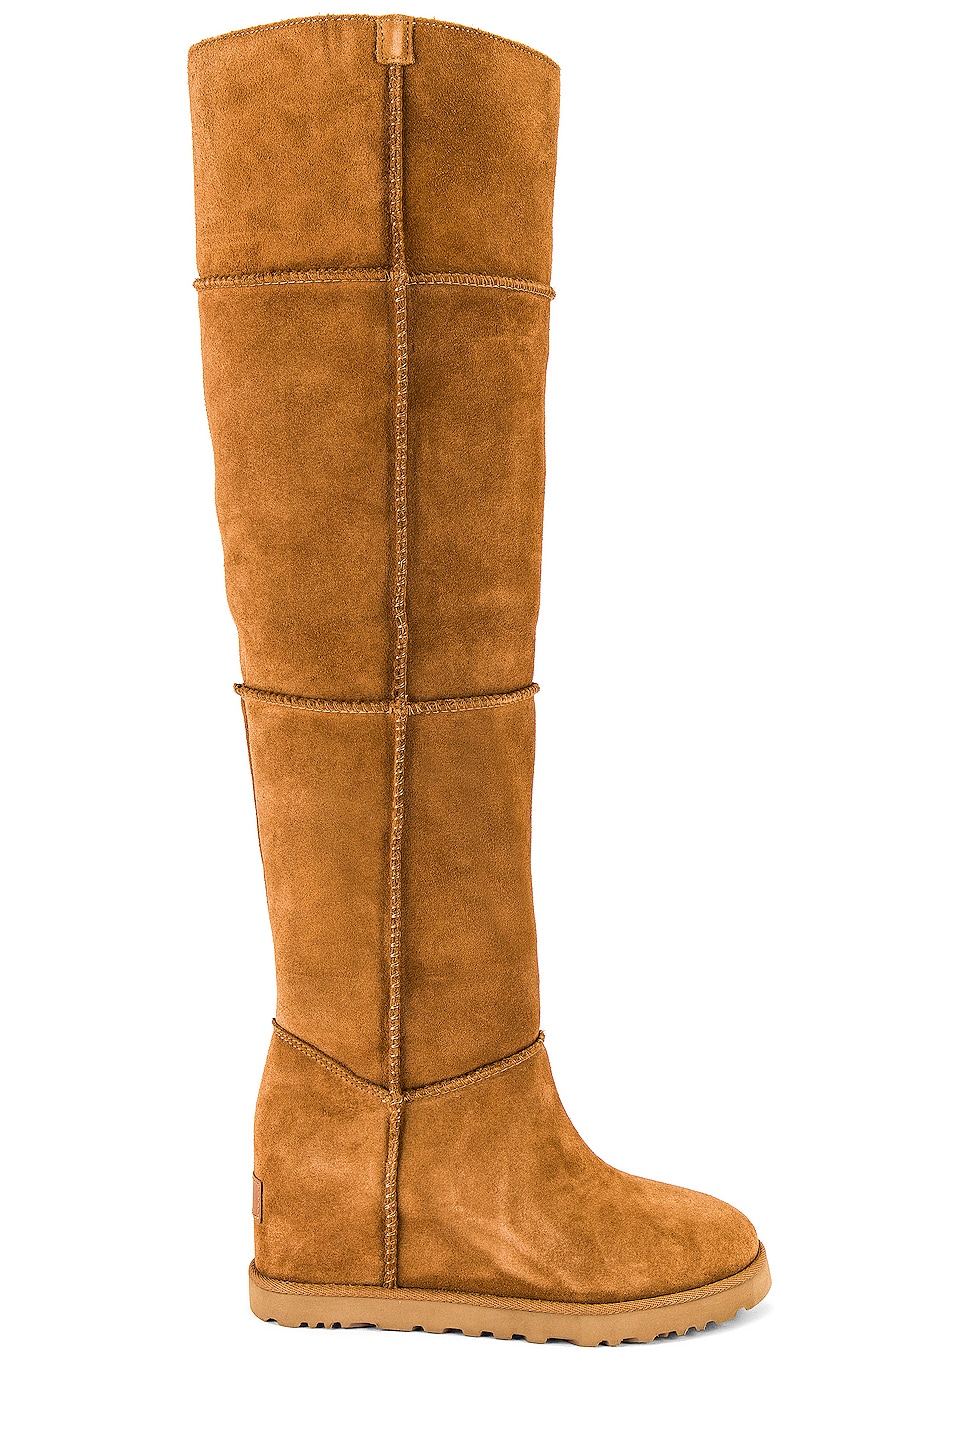 ugg classic femme over the knee